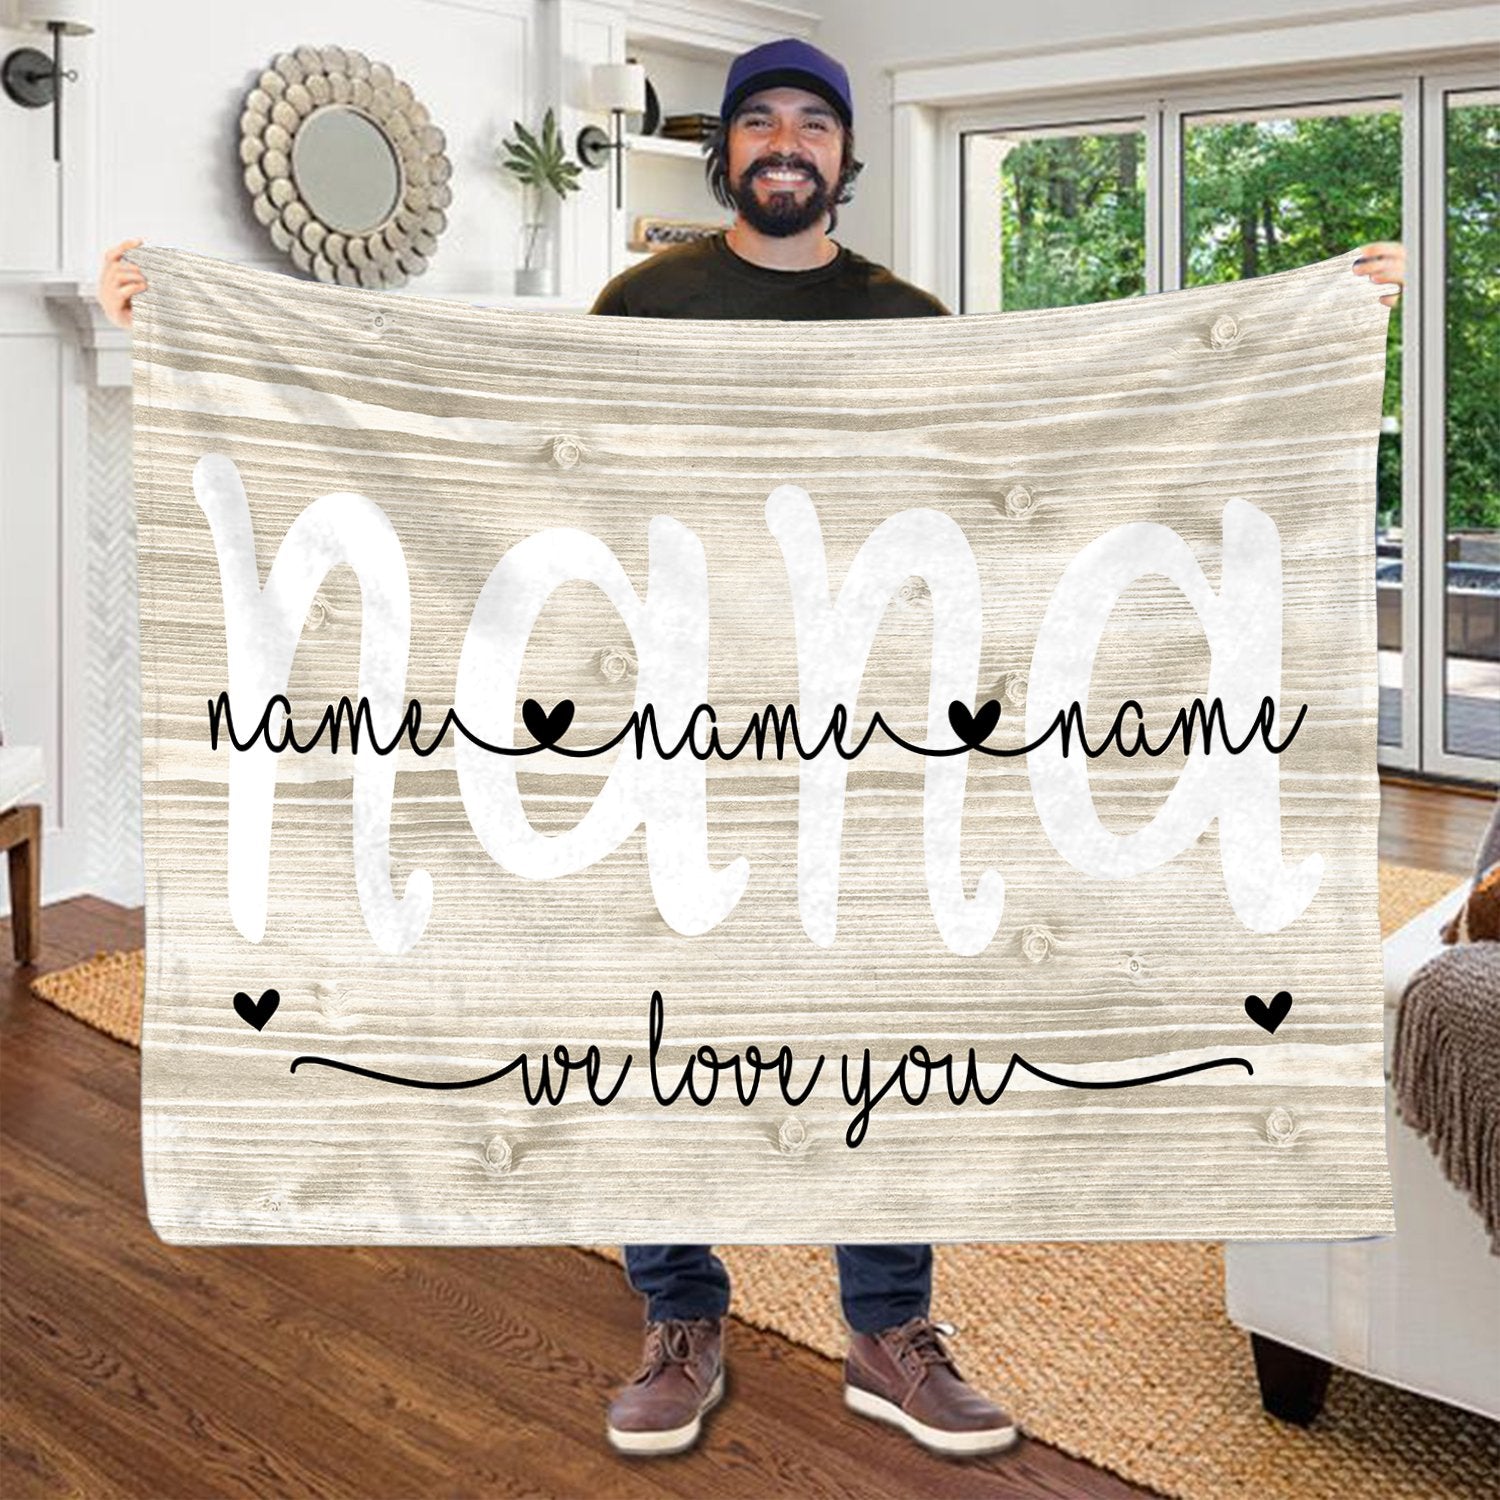 Personalized Nana With Grandkids Names Blanket Nana We Love You Blanket Gift For Grandma Mimi Nana.